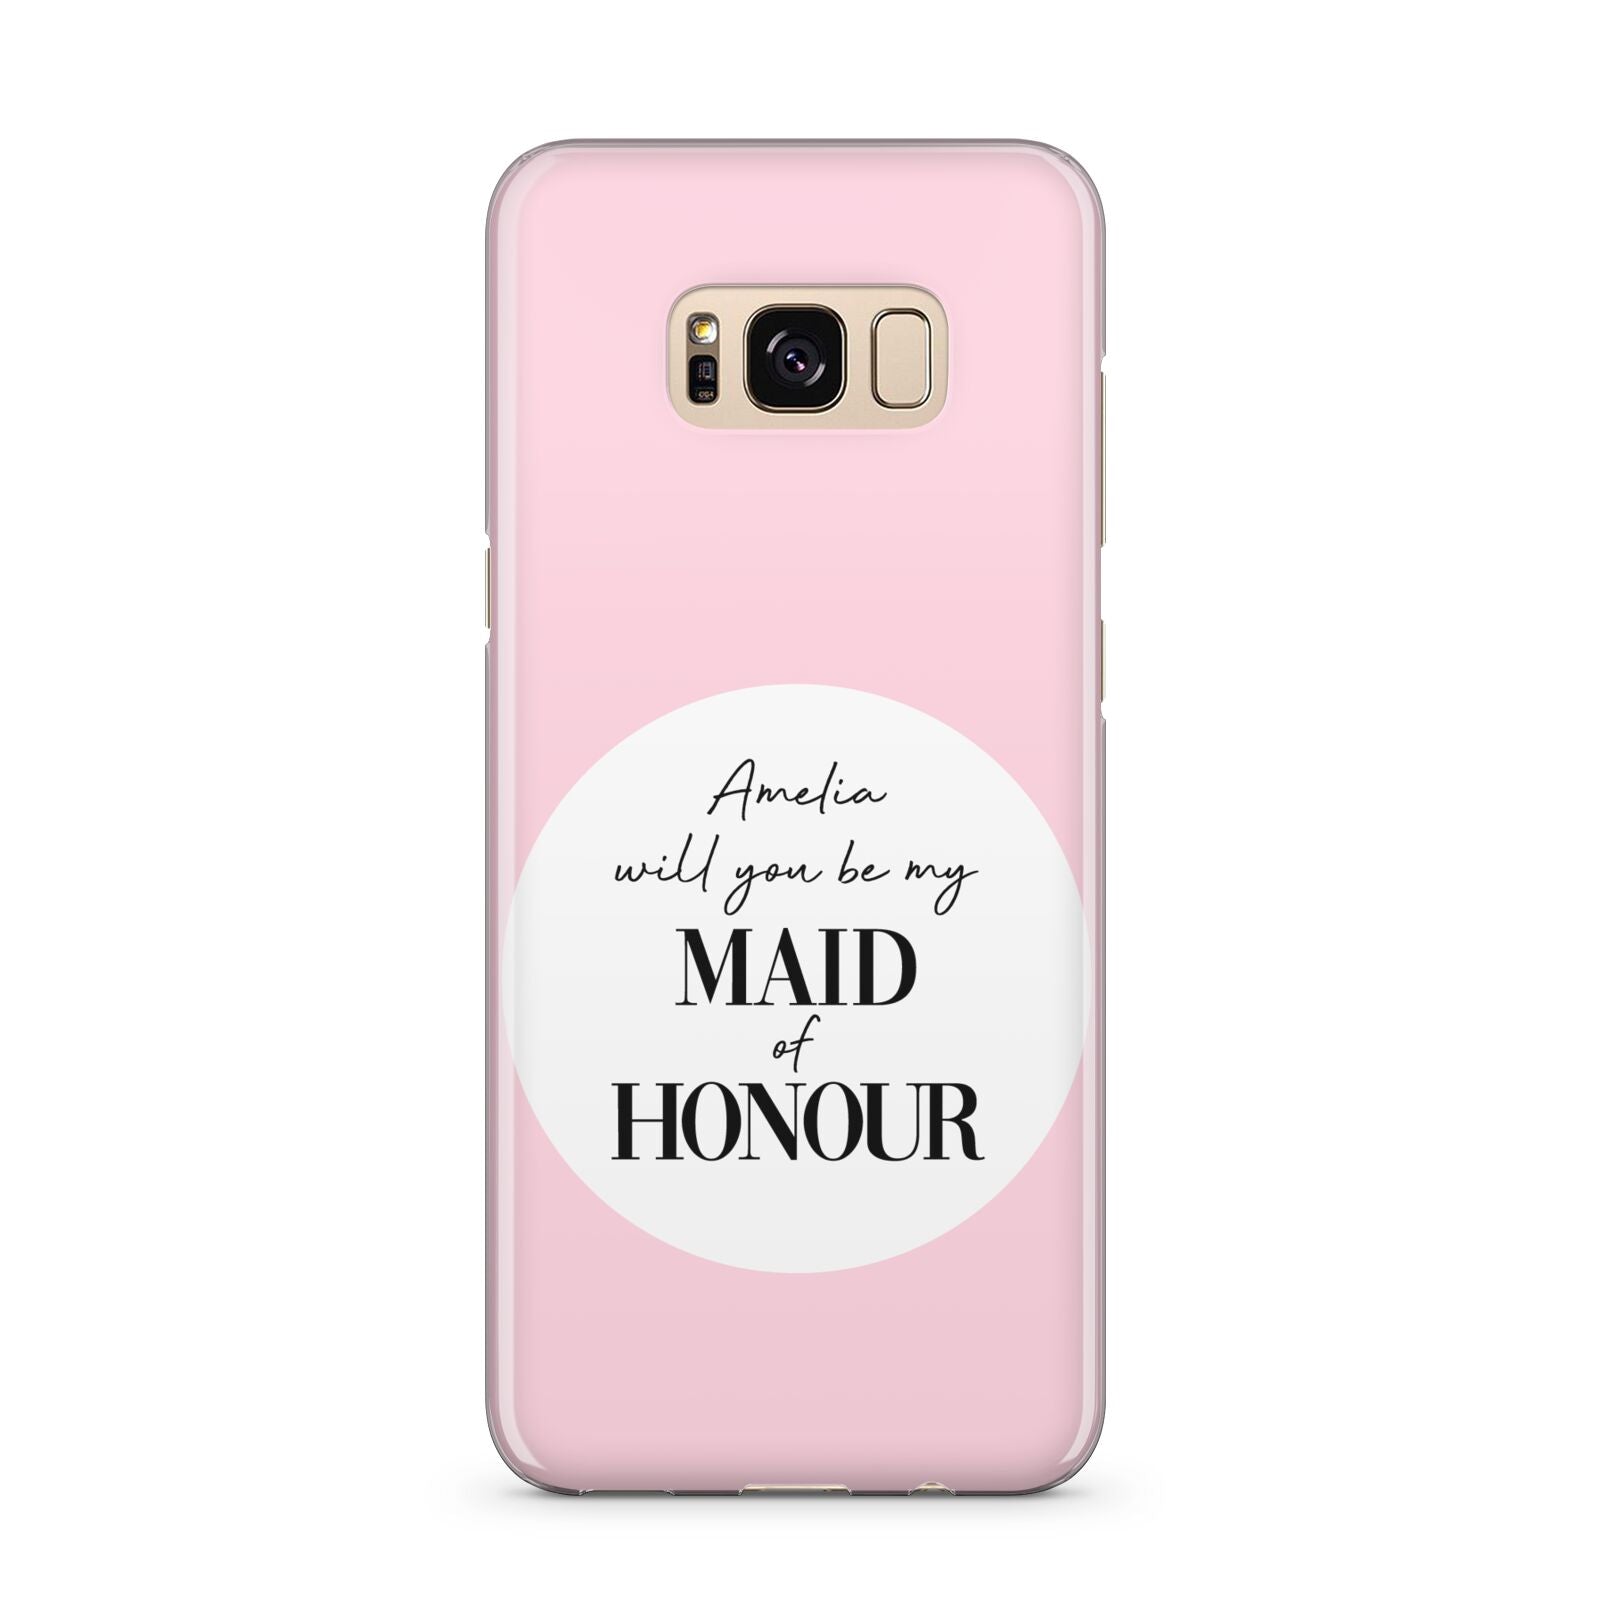 Will You Be My Maid Of Honour Samsung Galaxy S8 Plus Case